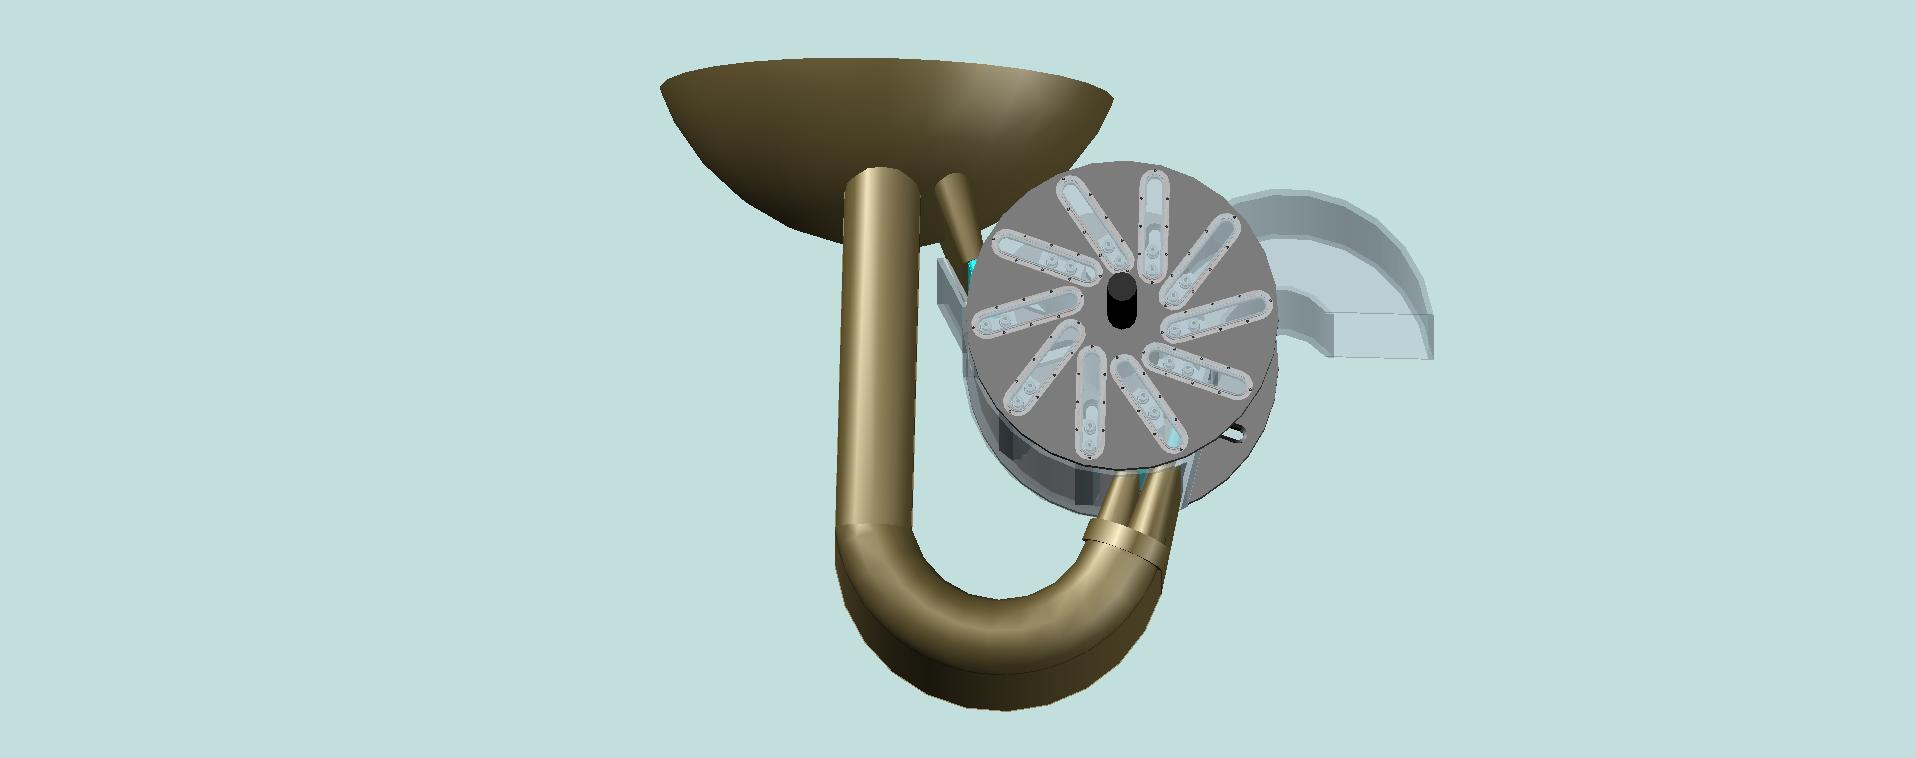 The exterior view of the variant turbine rotor equipped by movable blades, which are under the influence of water falling from a height through three nozzles.